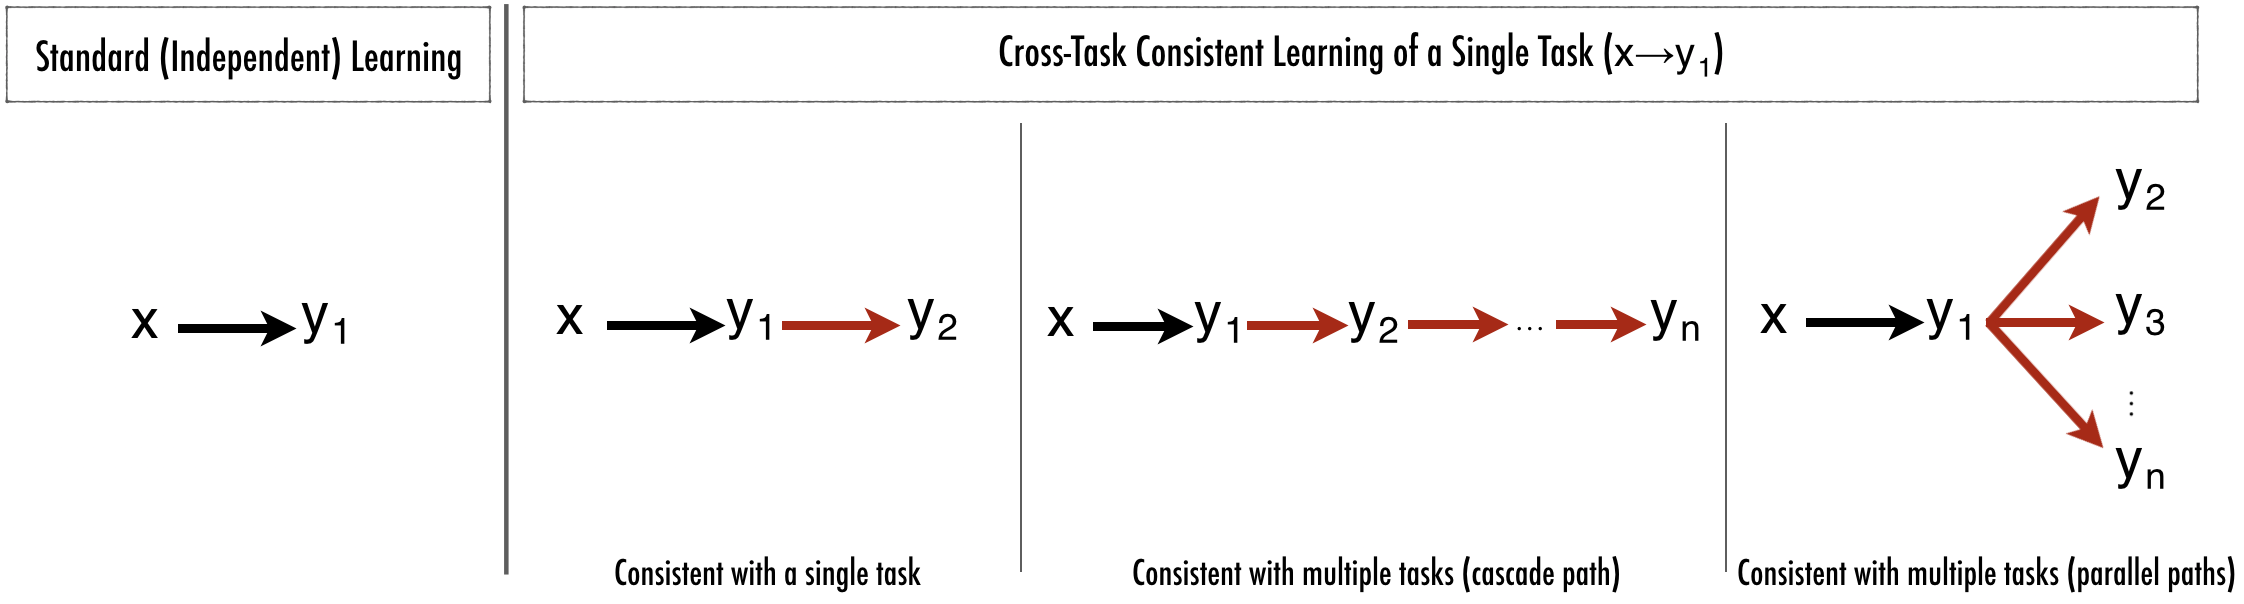 How to use cross-task consistency for single-task learning.